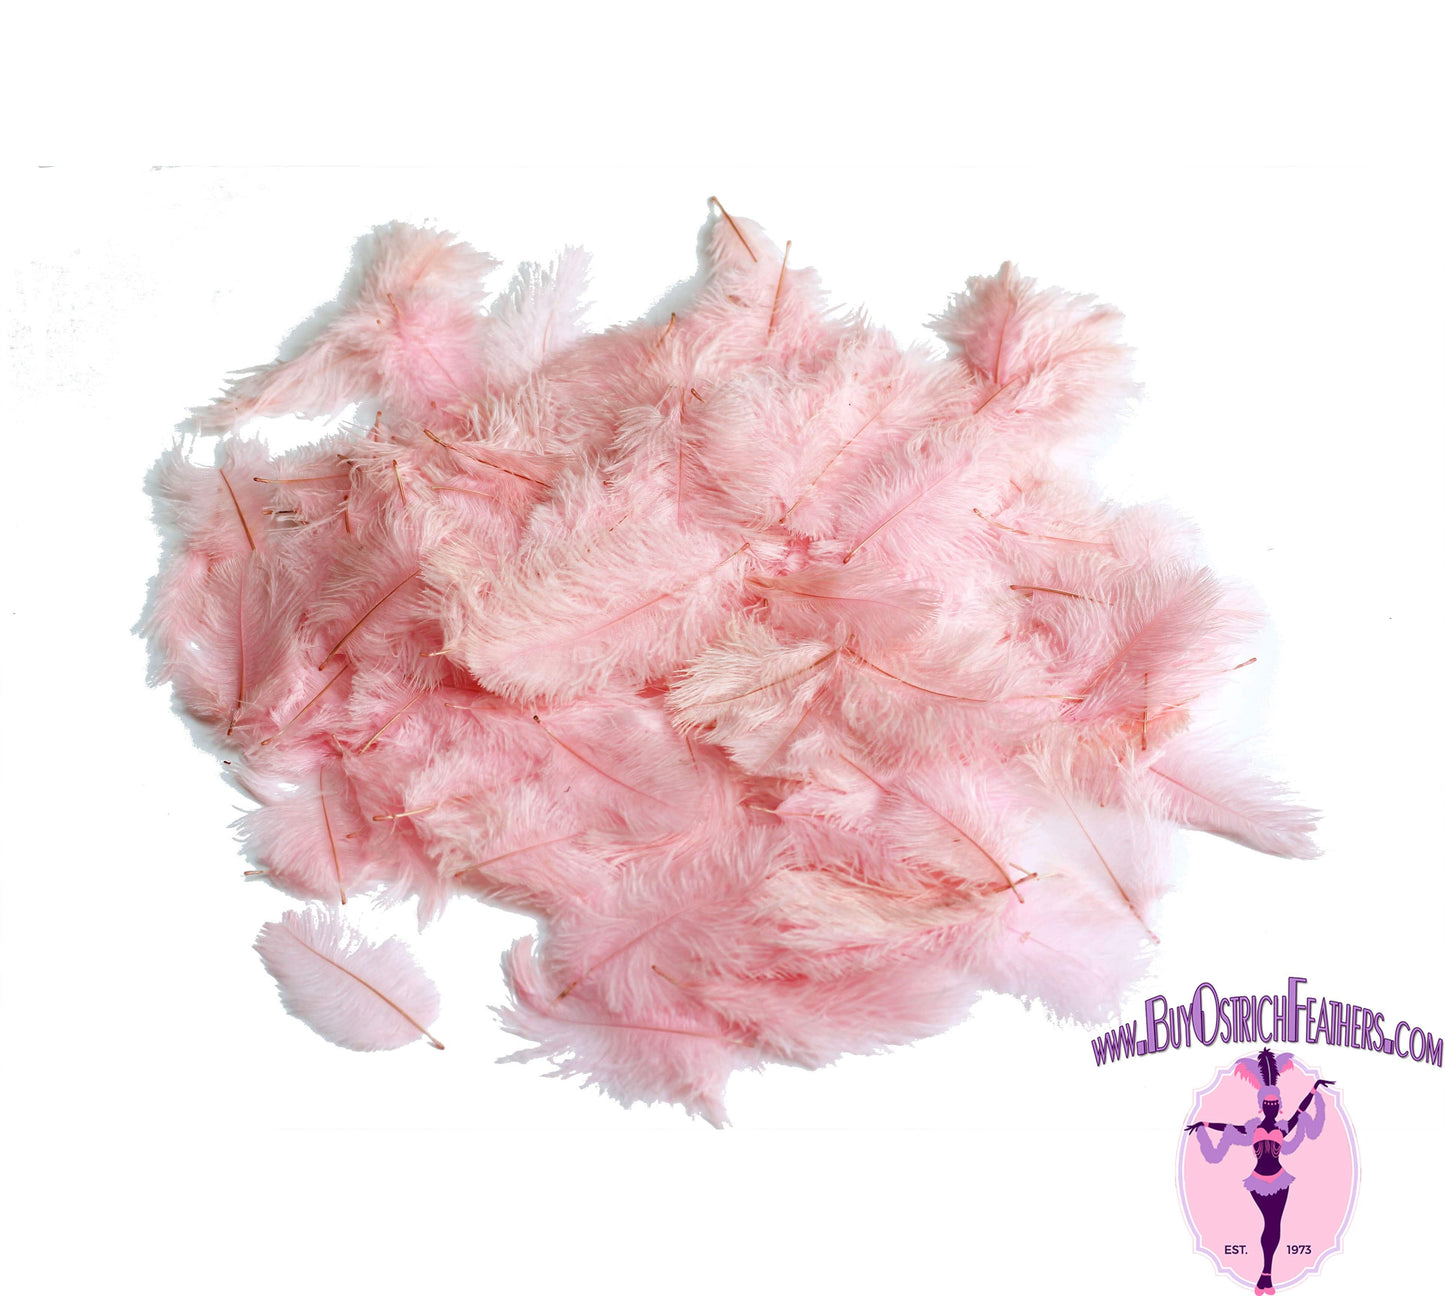 Confetti Craft Ostrich Feathers (Baby Pink) - Buy Ostrich Feathers